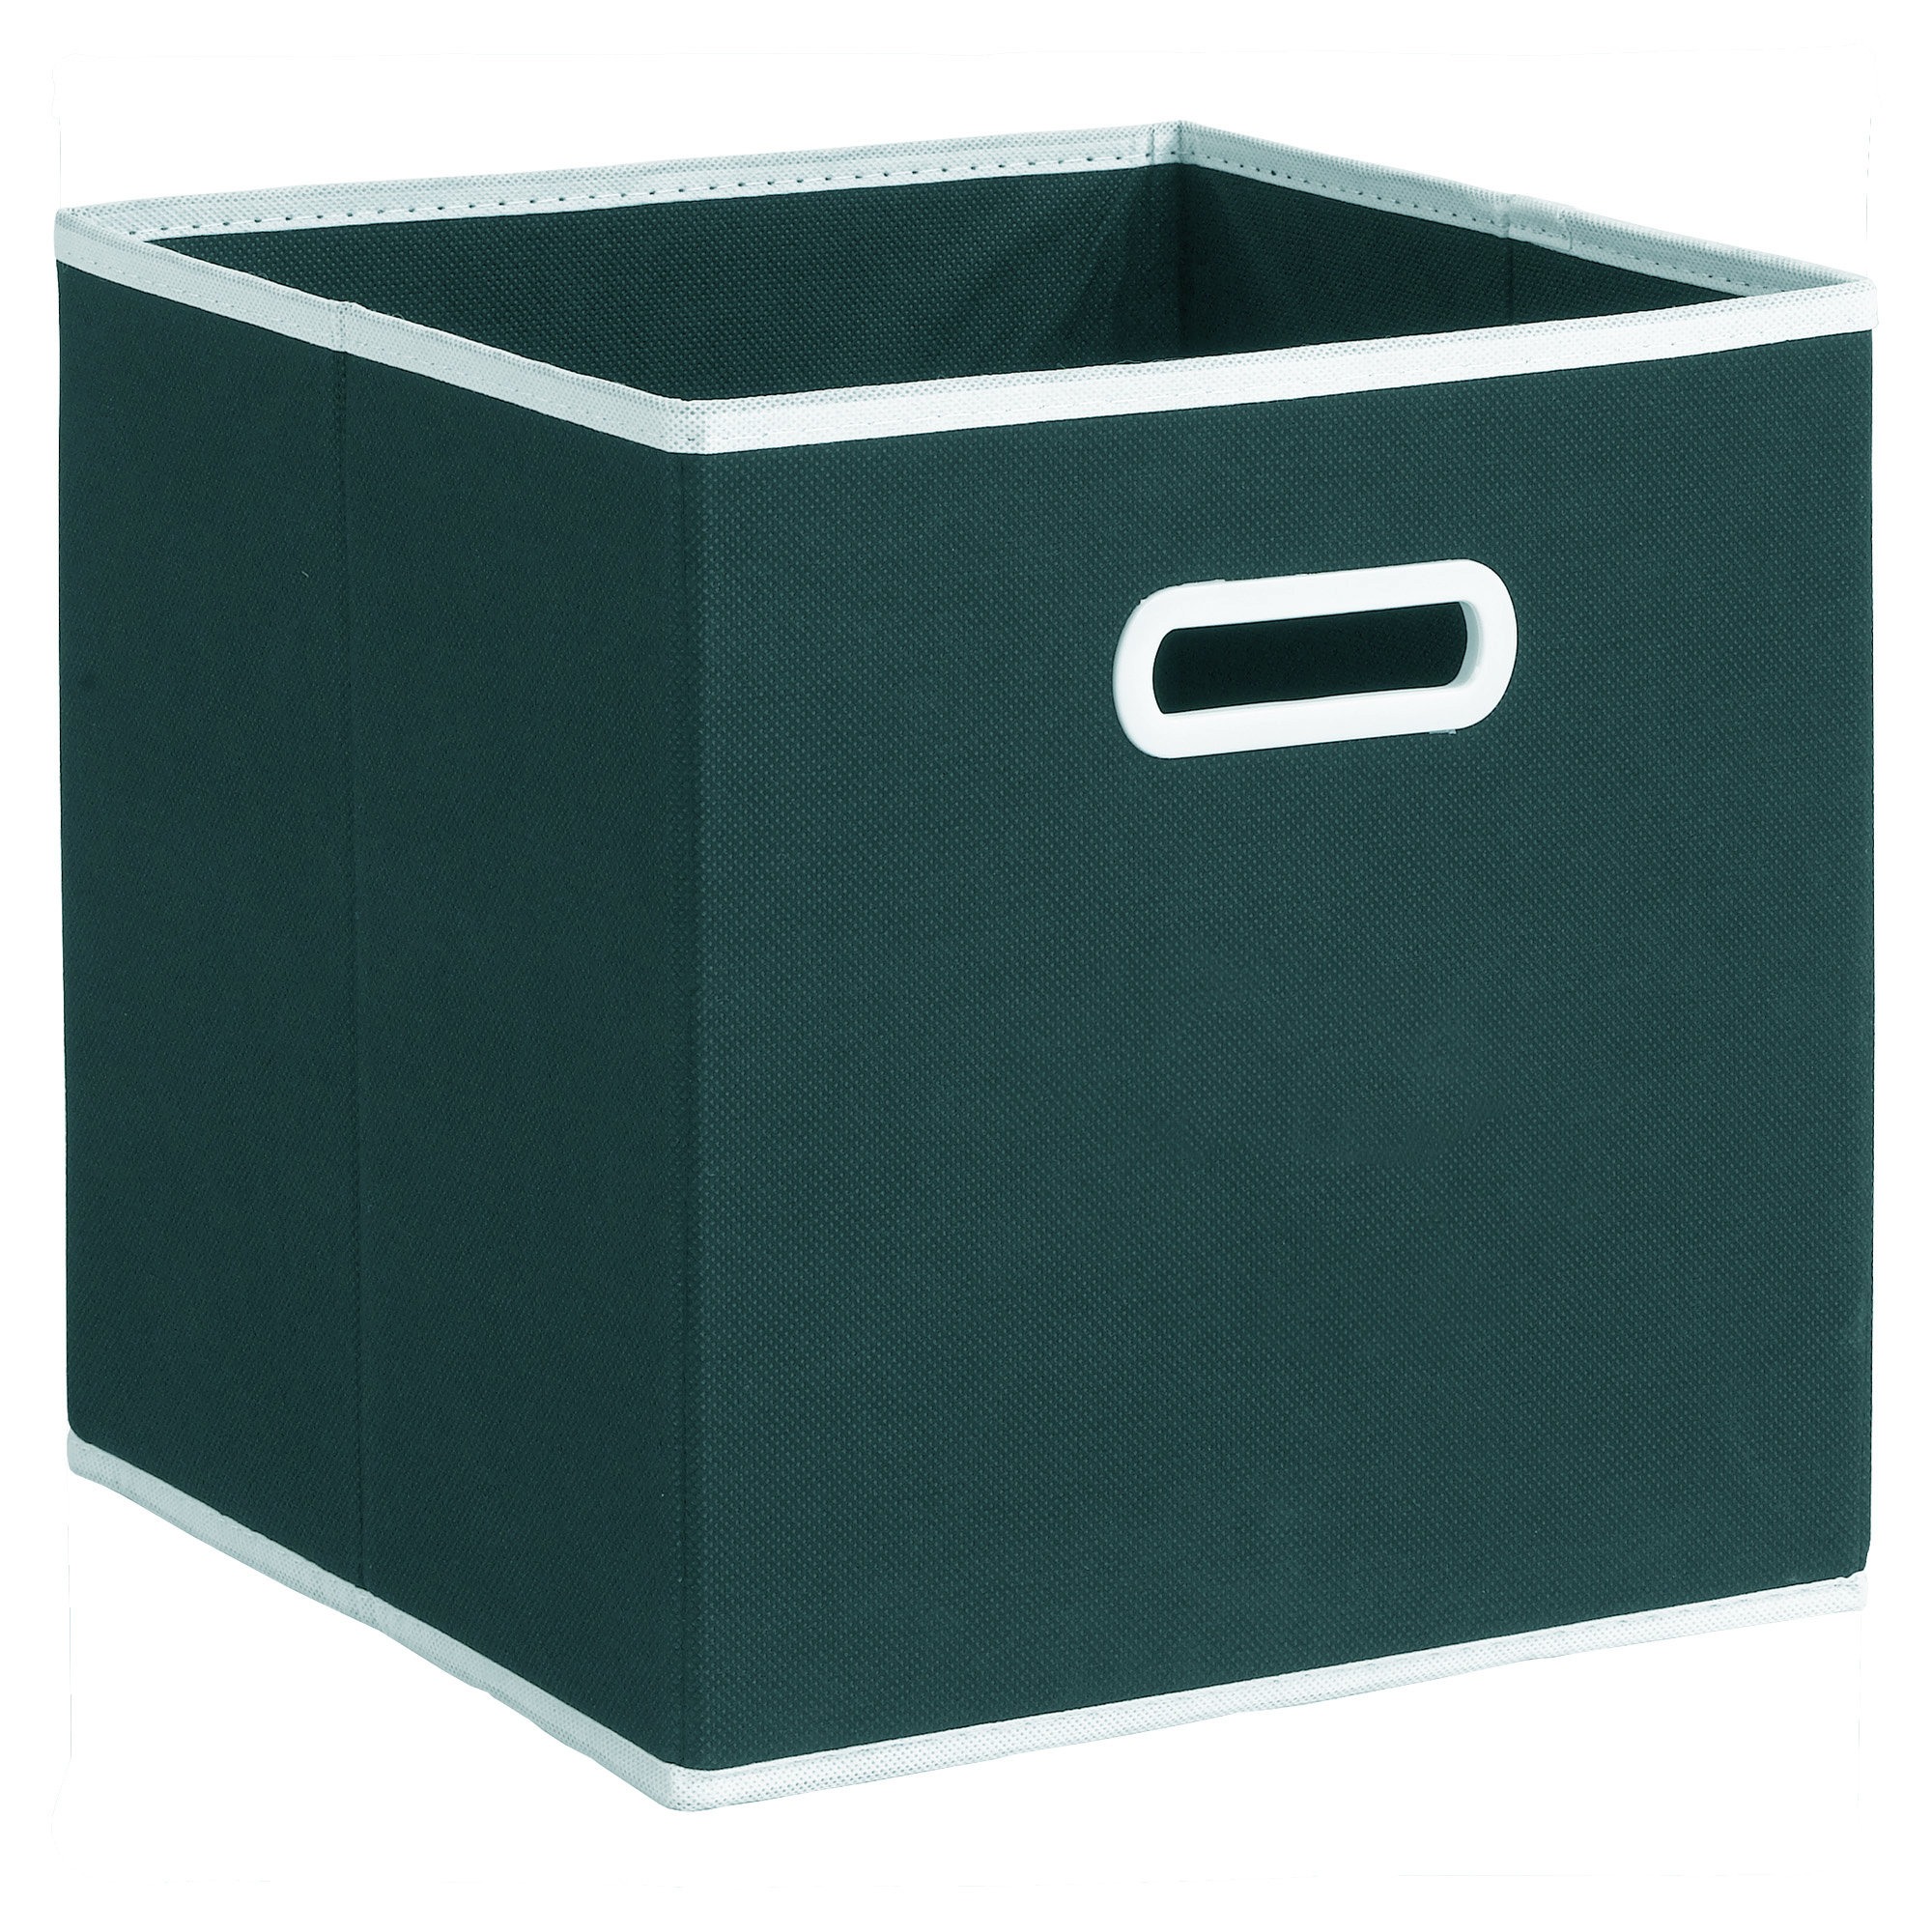 Rebrilliant Storeits Fabric Storage Bin Wayfair intended for dimensions 2000 X 2000